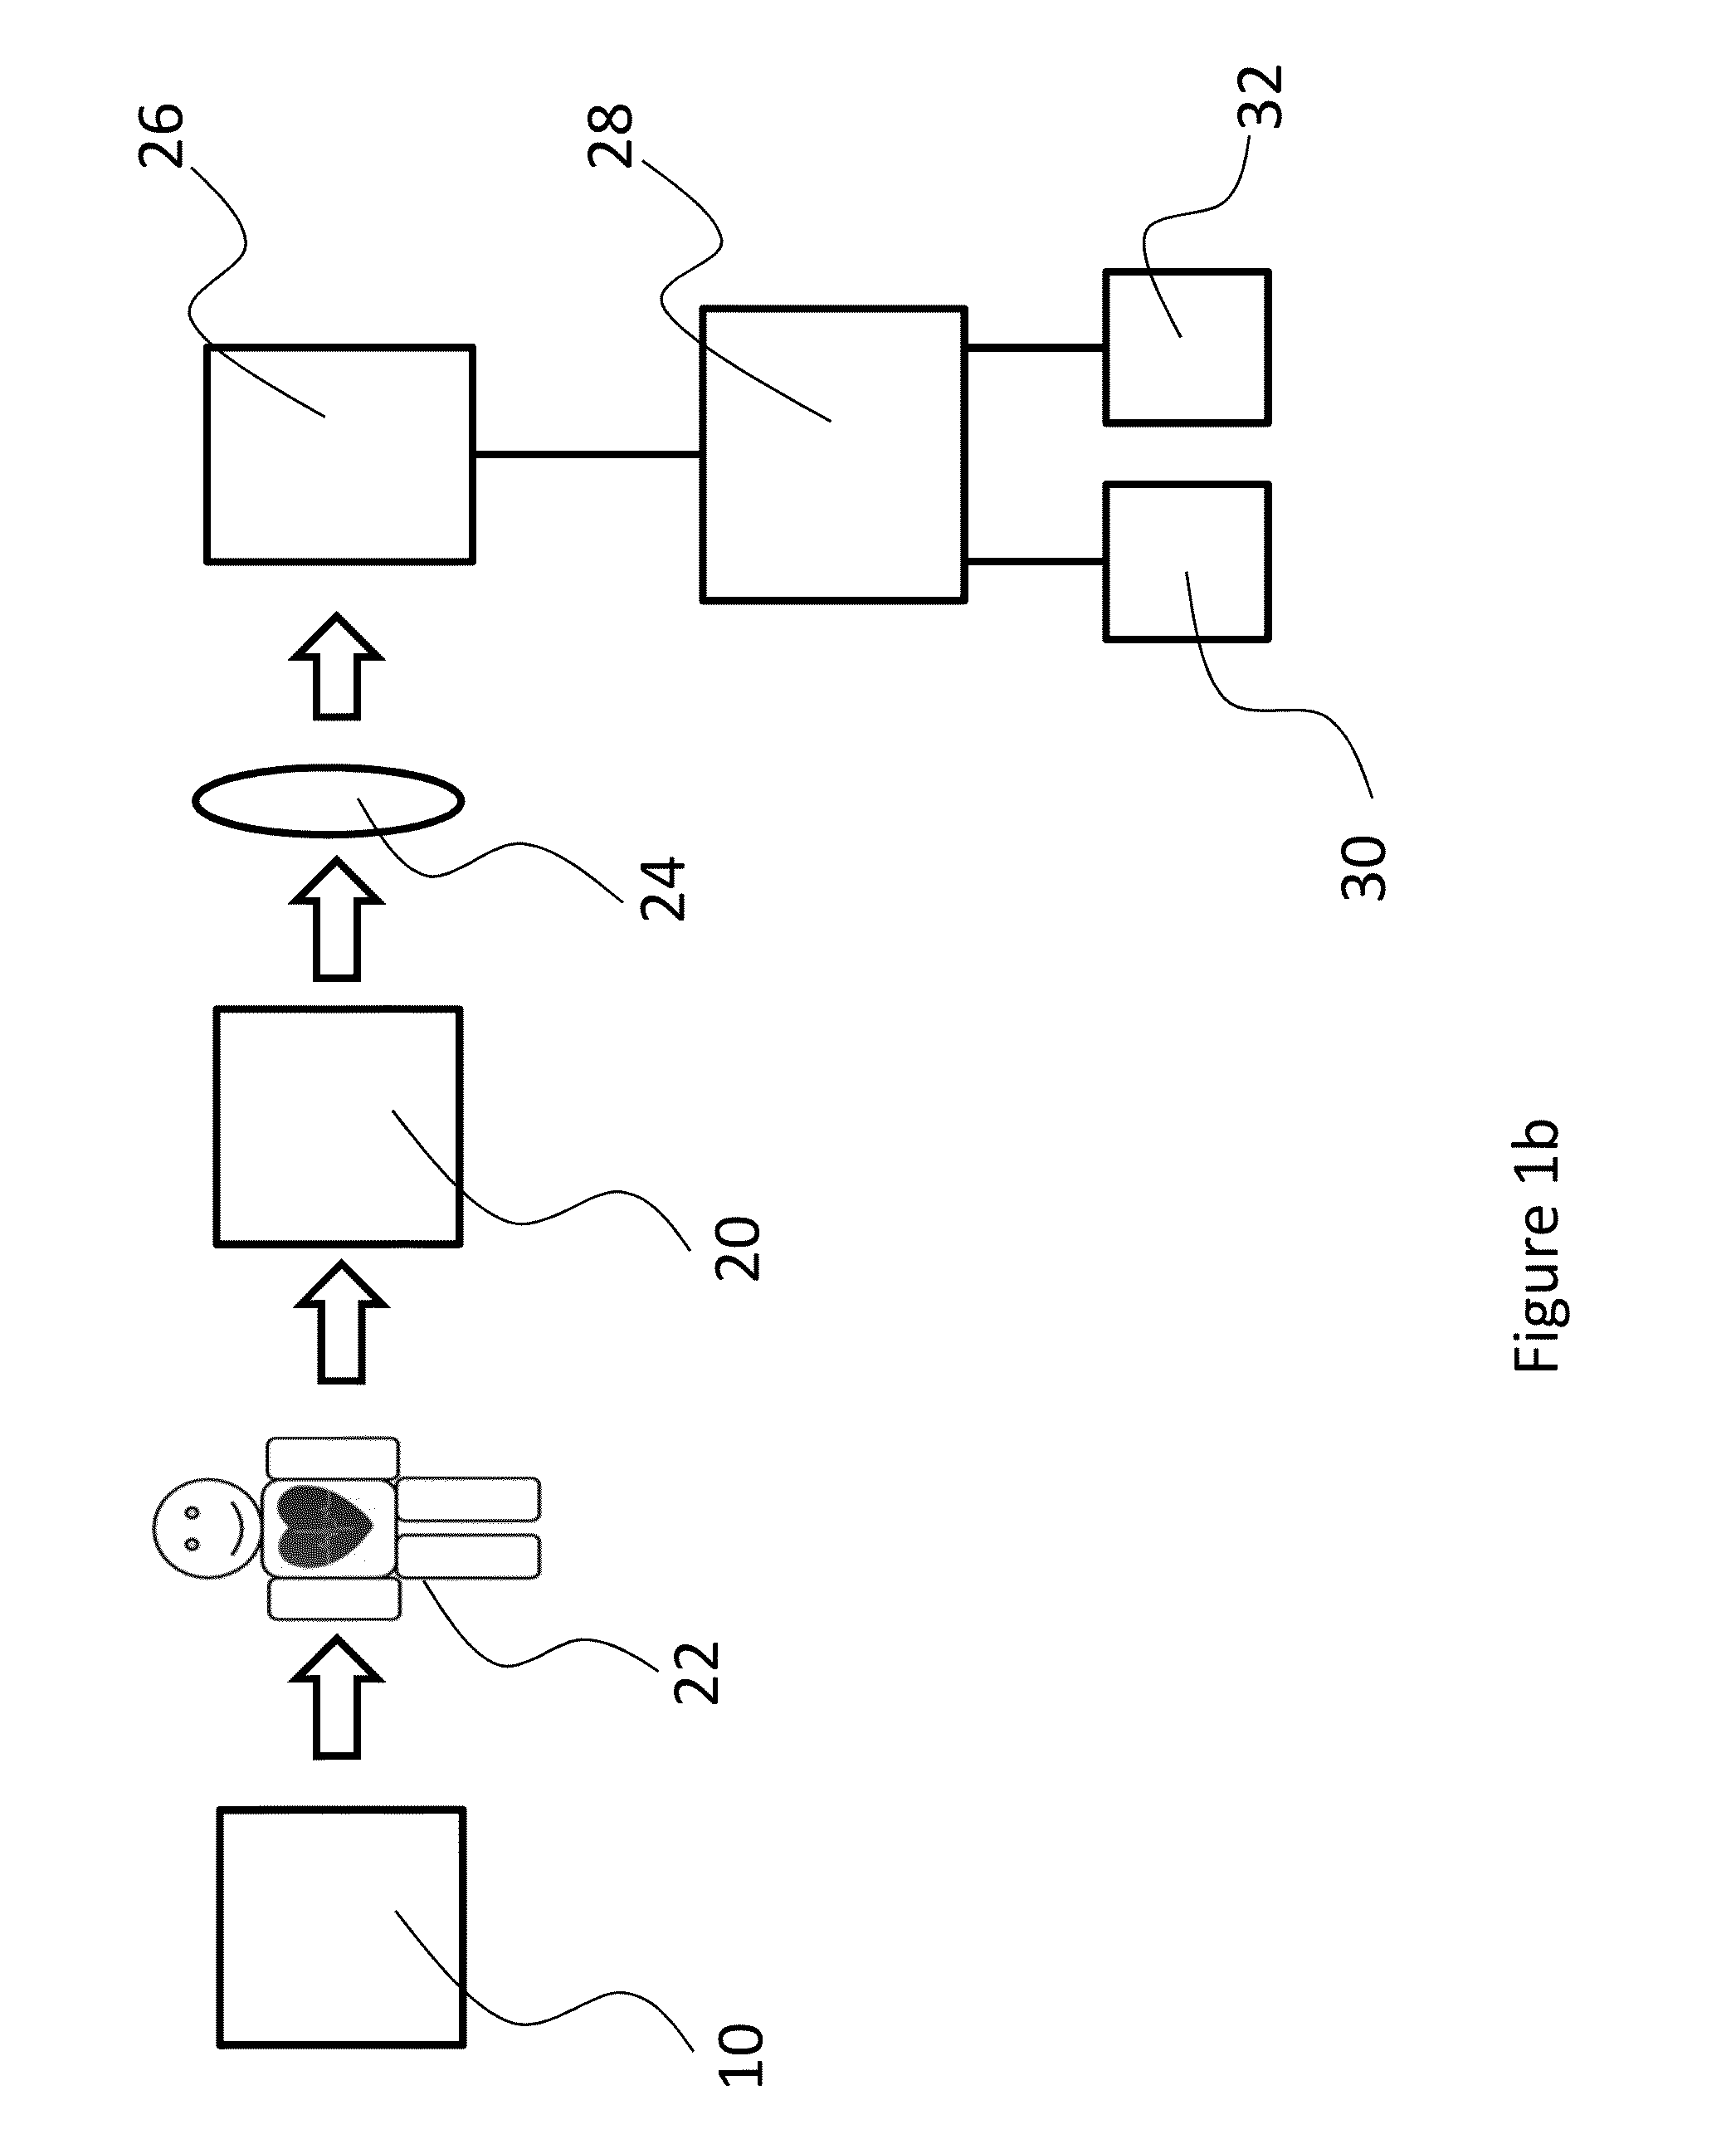 System and Method for Measurement of Physiological Data with Light Modulation